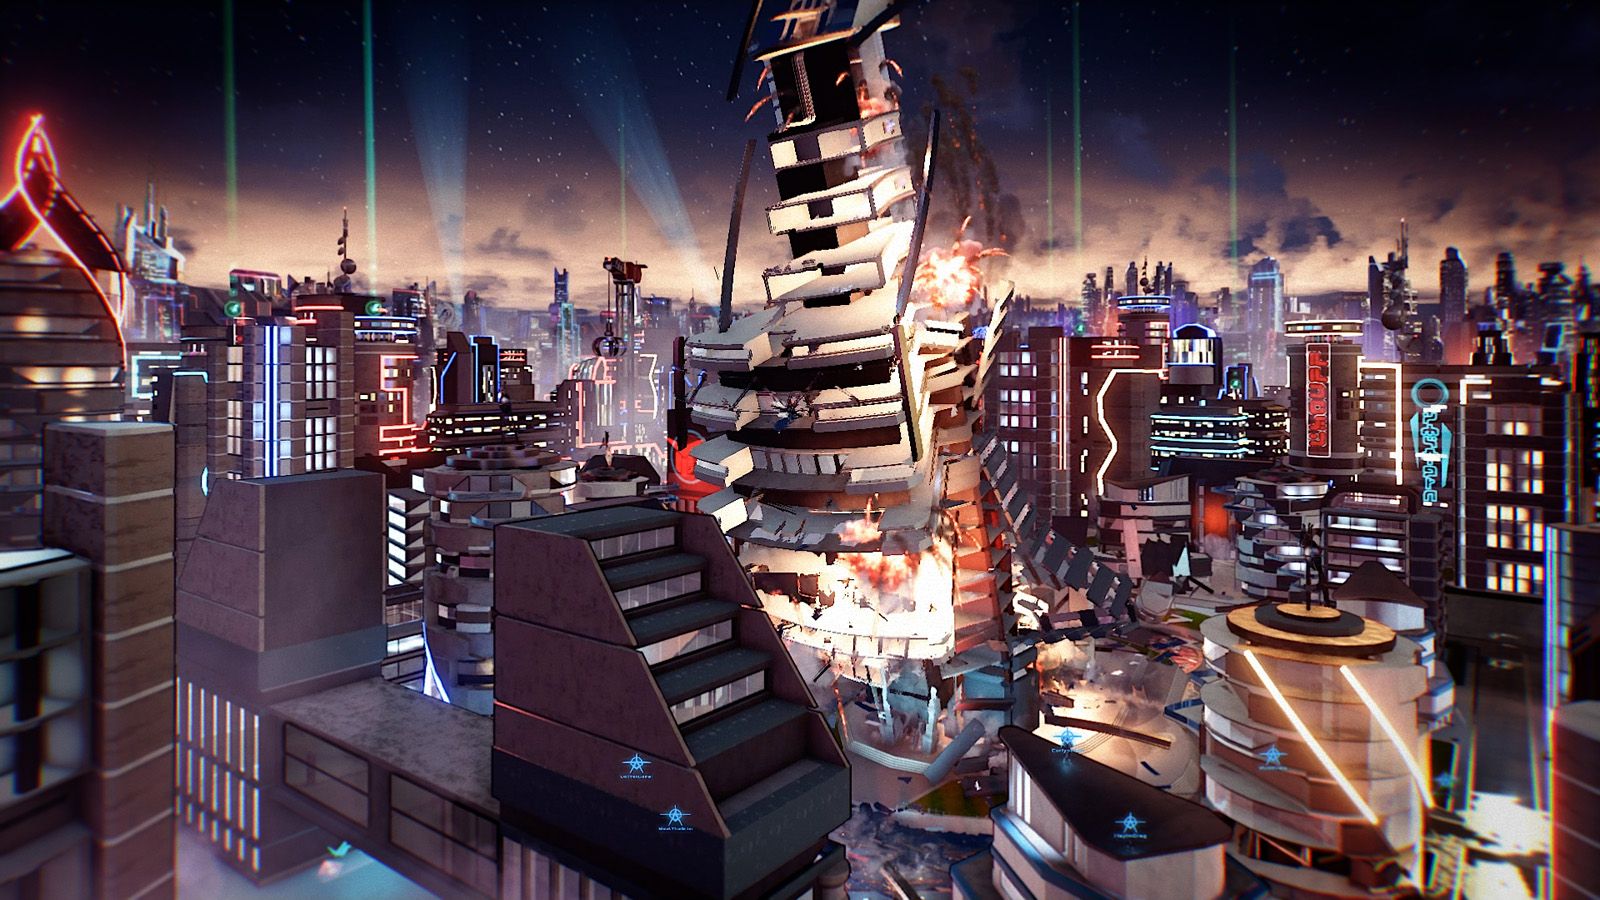 crackdown 3 preview the xbox one game that is beyond the ps4 s capabilities image 1